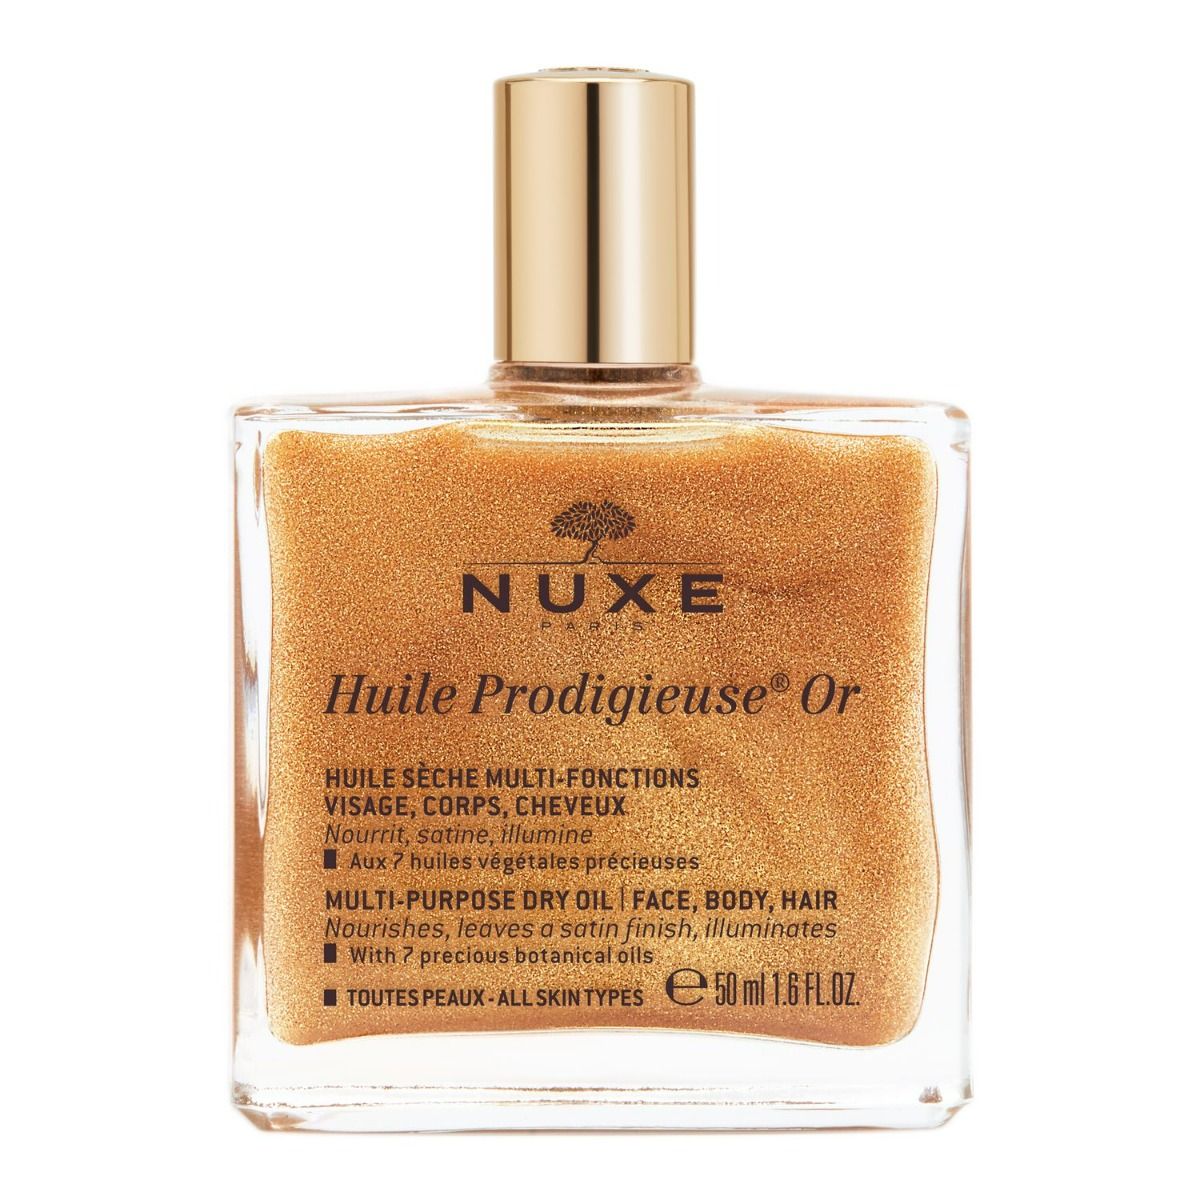 Nuxe Huile Prodigieuse Or масло для лица, тела и волос, 50 ml nuxe масло huile prodigieuse florale цветочное сухое 50 мл